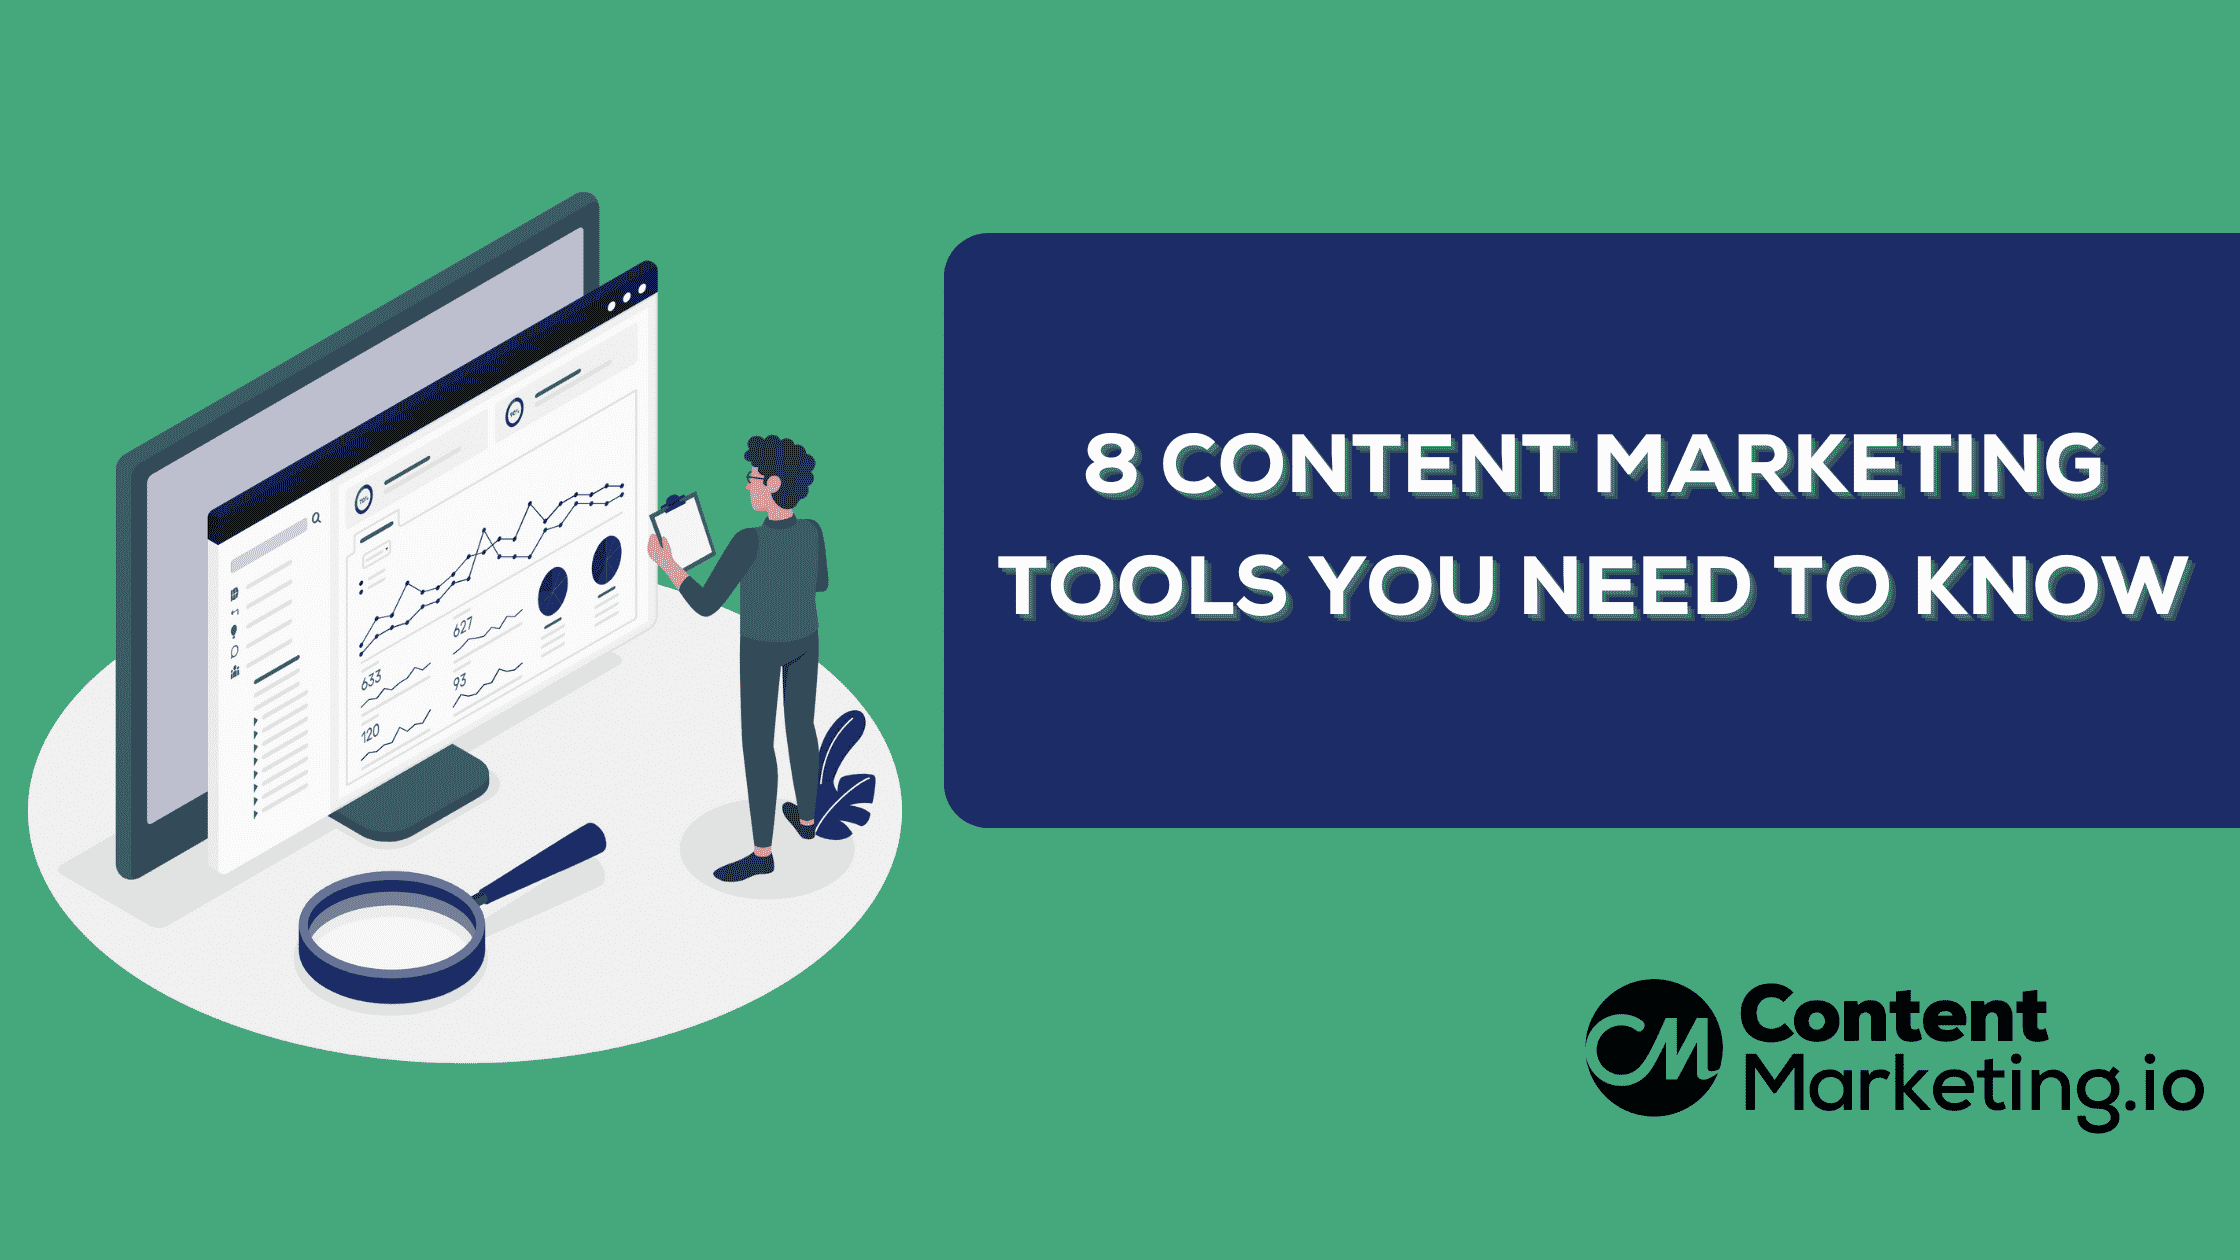 8 Content Marketing Tools You Need to Know